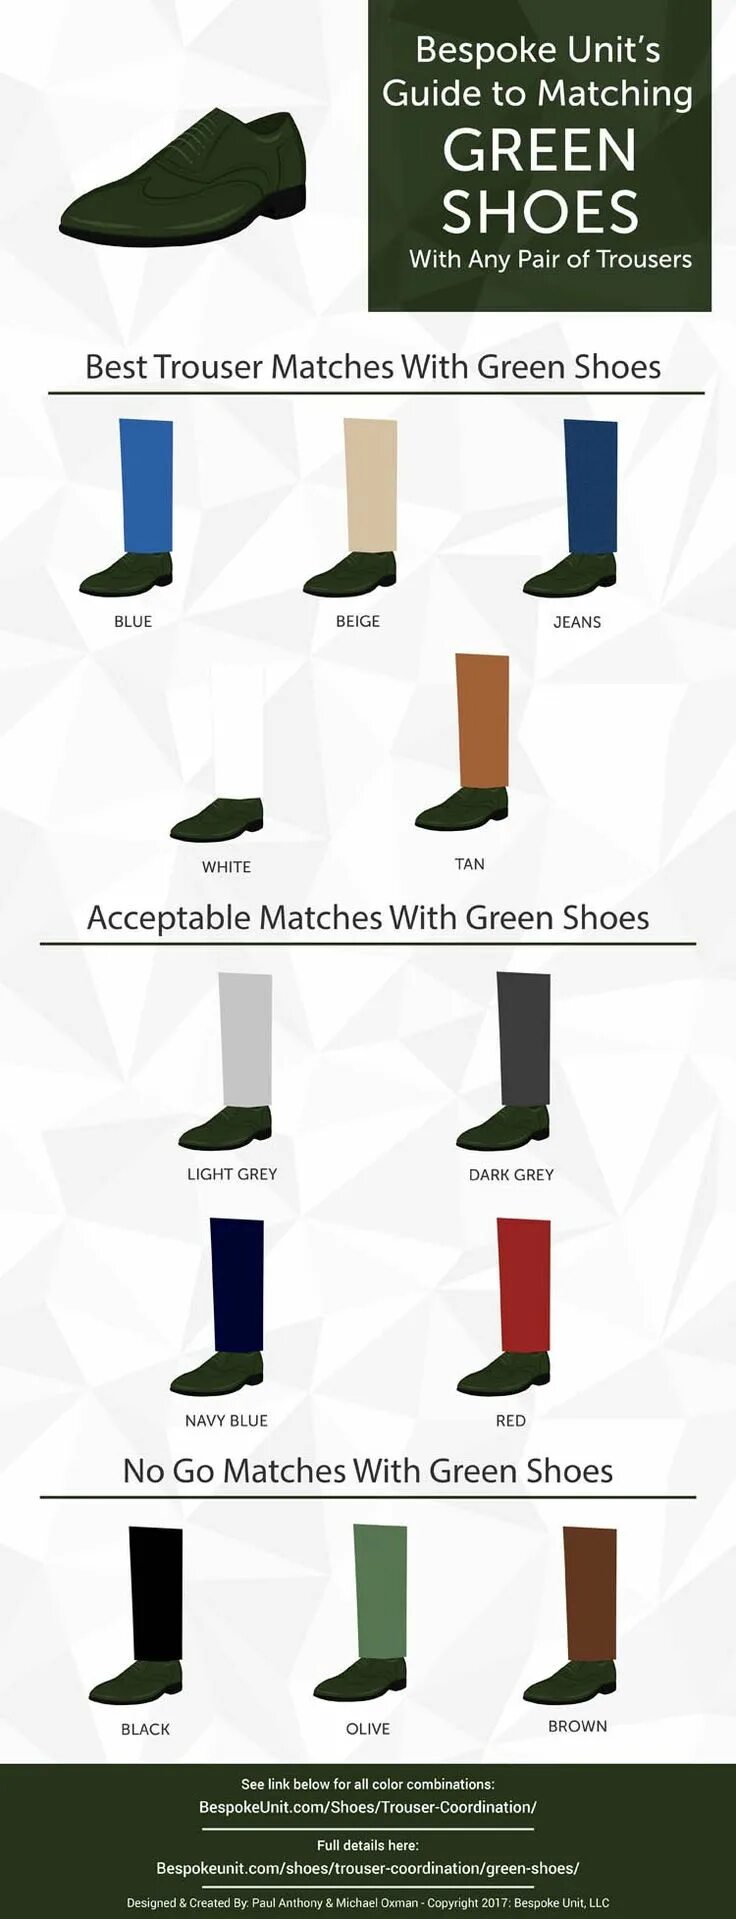 Match guide. Match and Match обувь. Match Match туфли зеленые. What matched Green. What Shoes to Wear with Bell-bottom trousers.